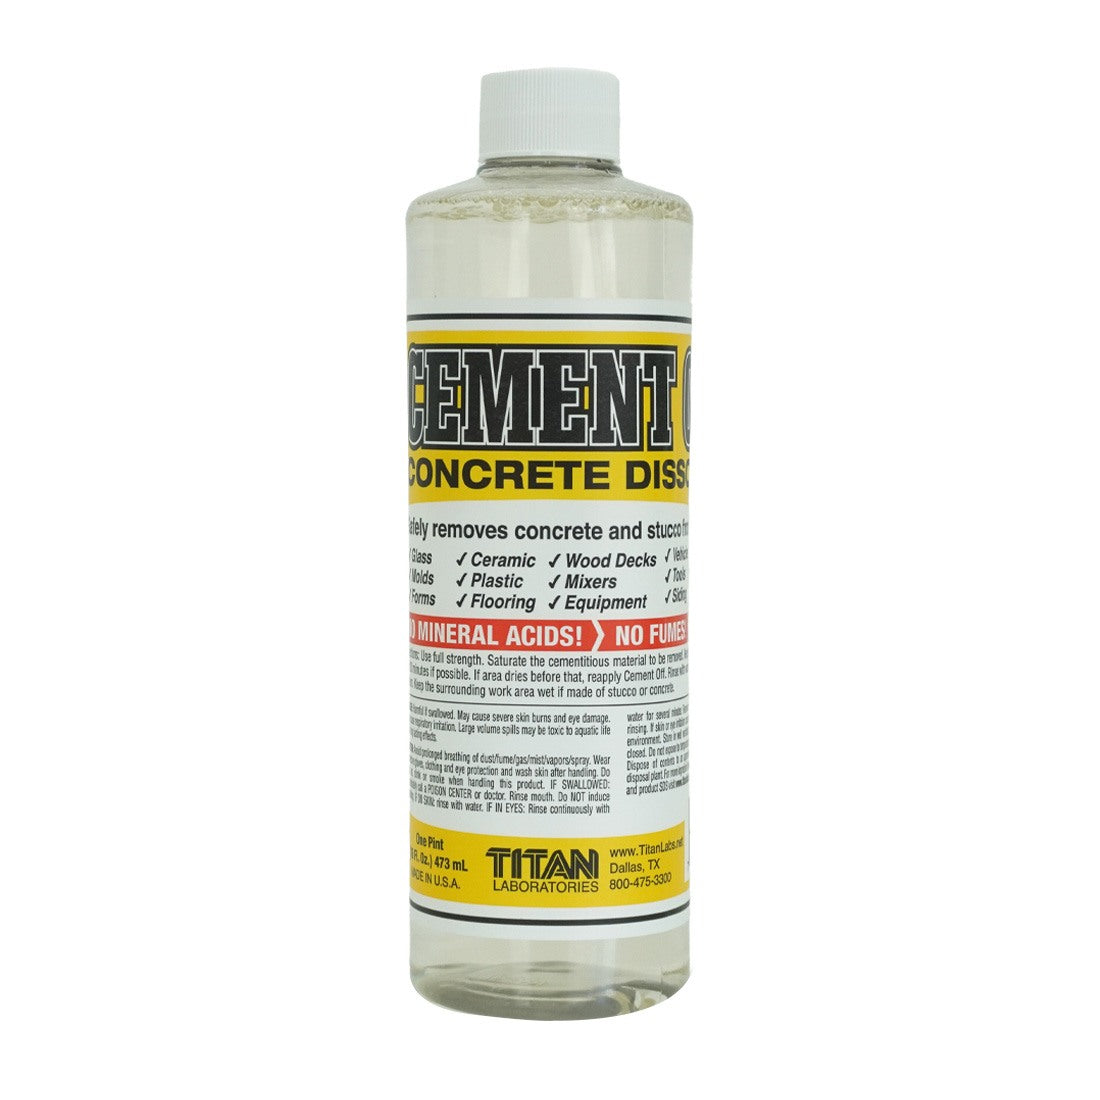 BEST TEST ACID FREE RUBBER CEMENT 160Z CAN - 089665001416